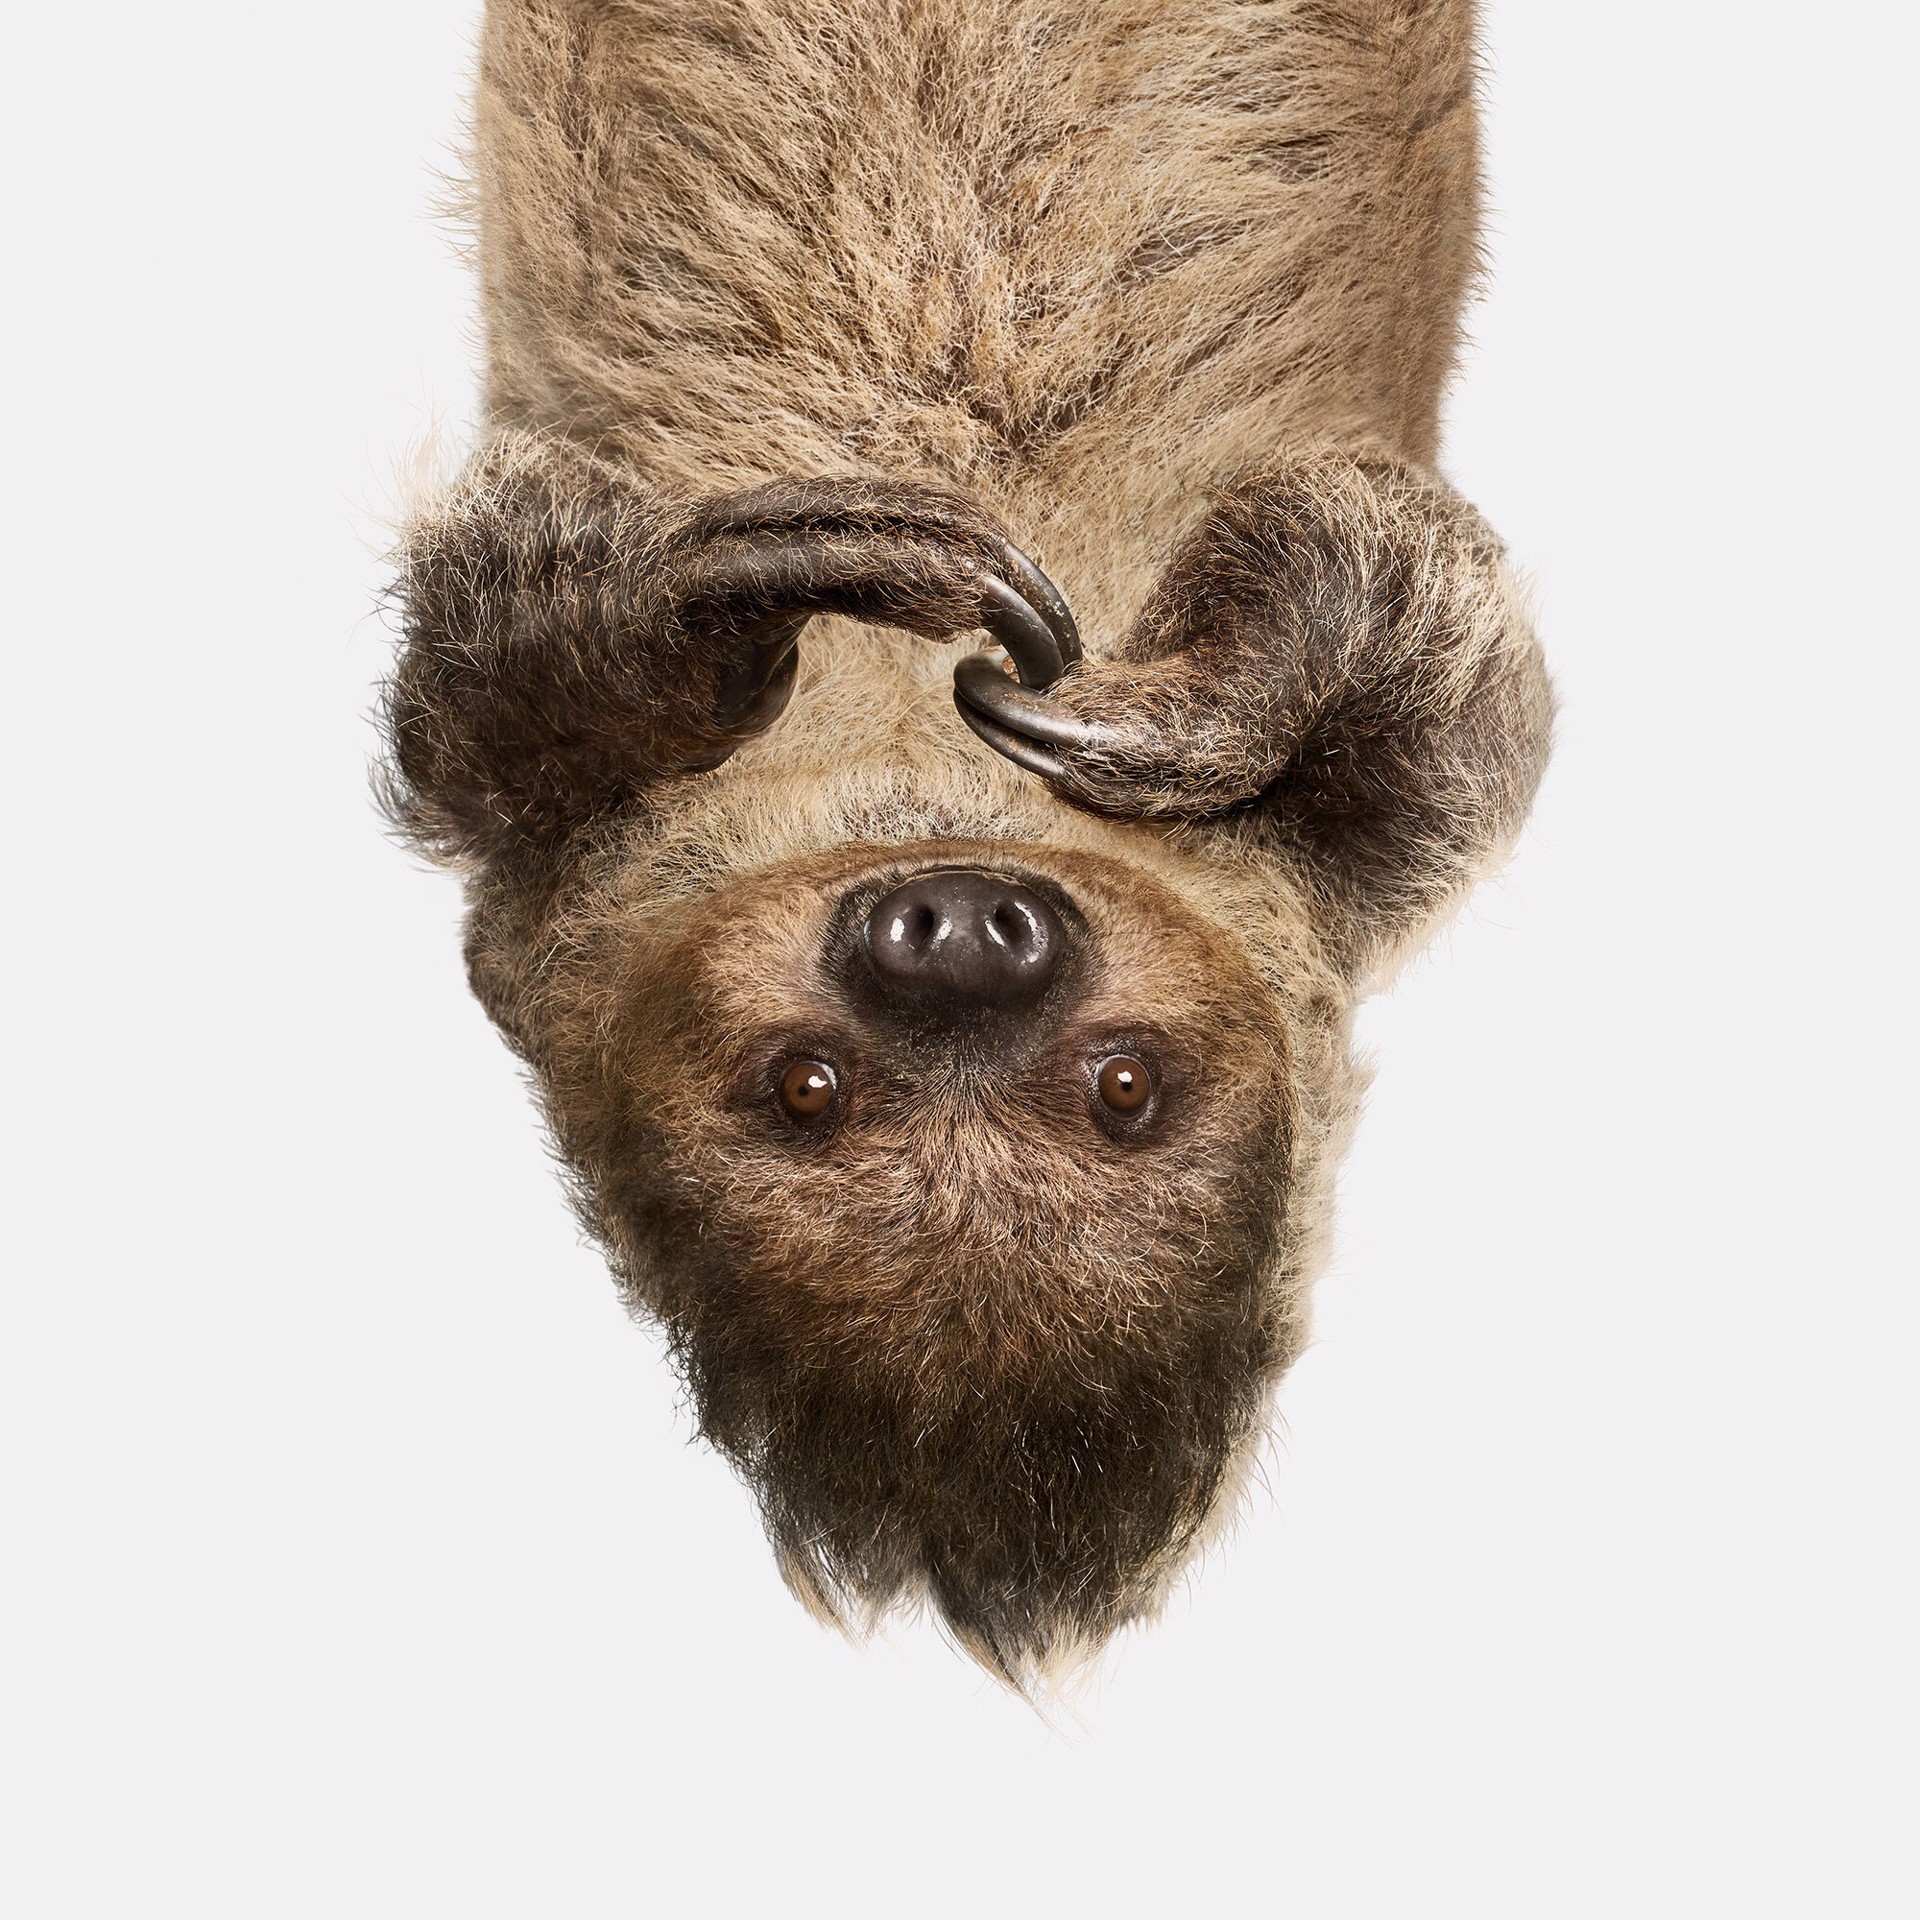 Upside Down Sloth by Randal Ford